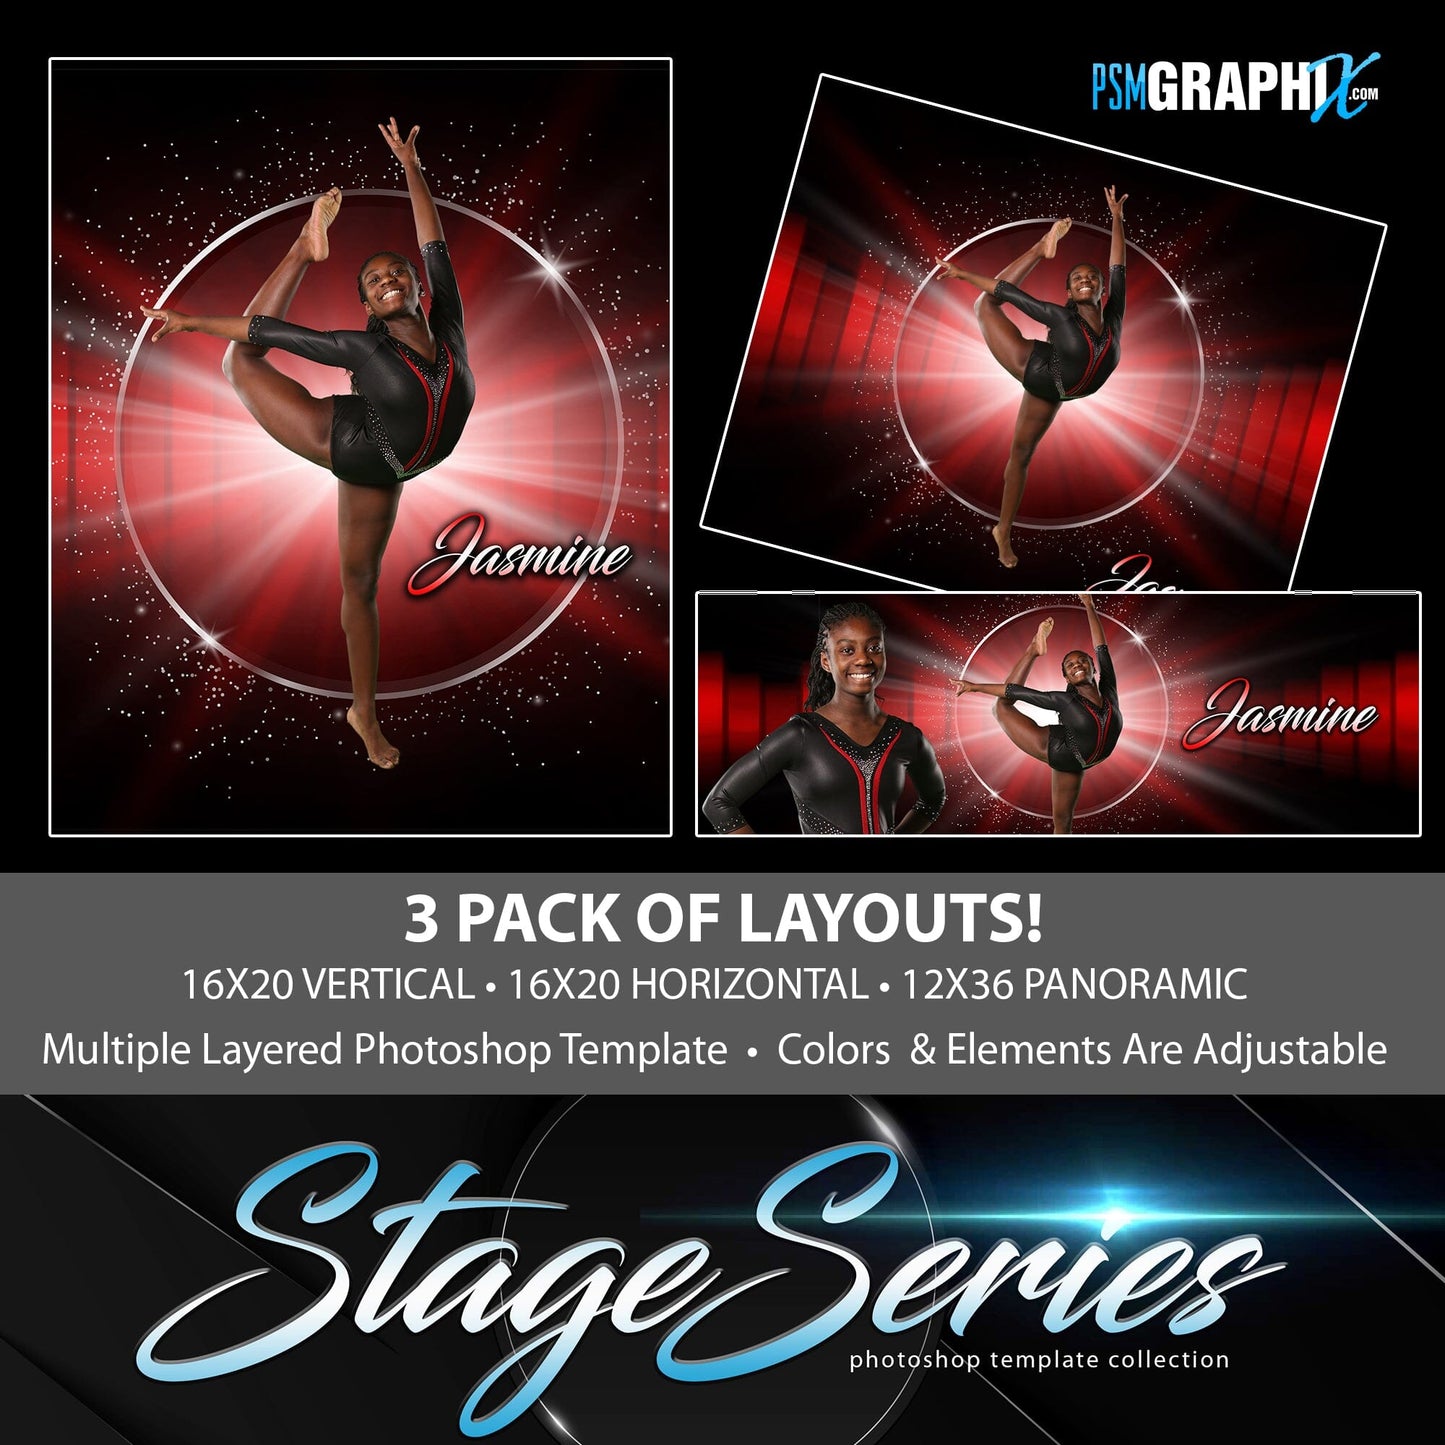 Star Dust - Stage Series II - Photoshop Template 3 Pack-Photoshop Template - PSMGraphix